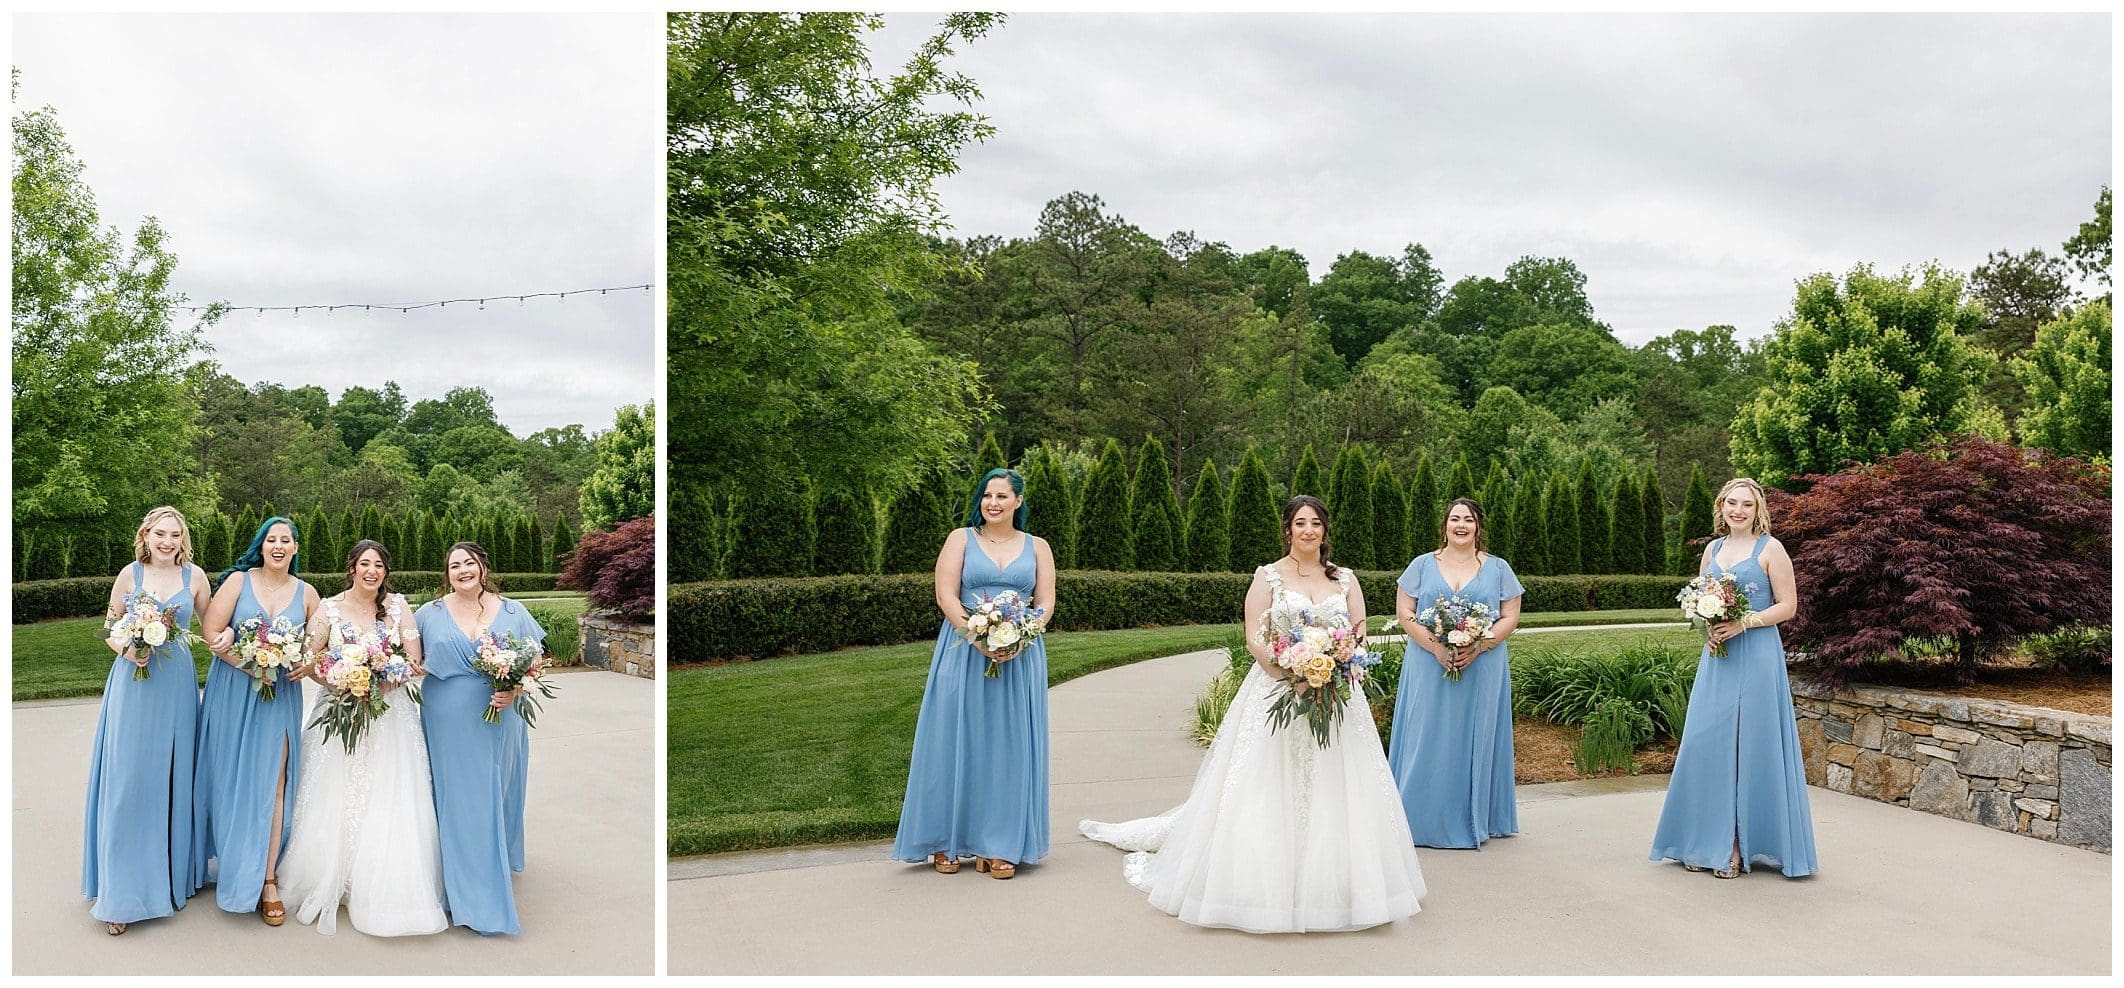 Bride with bridesmaids wearing blue dresses with spring flowers with blue, pink and yellow